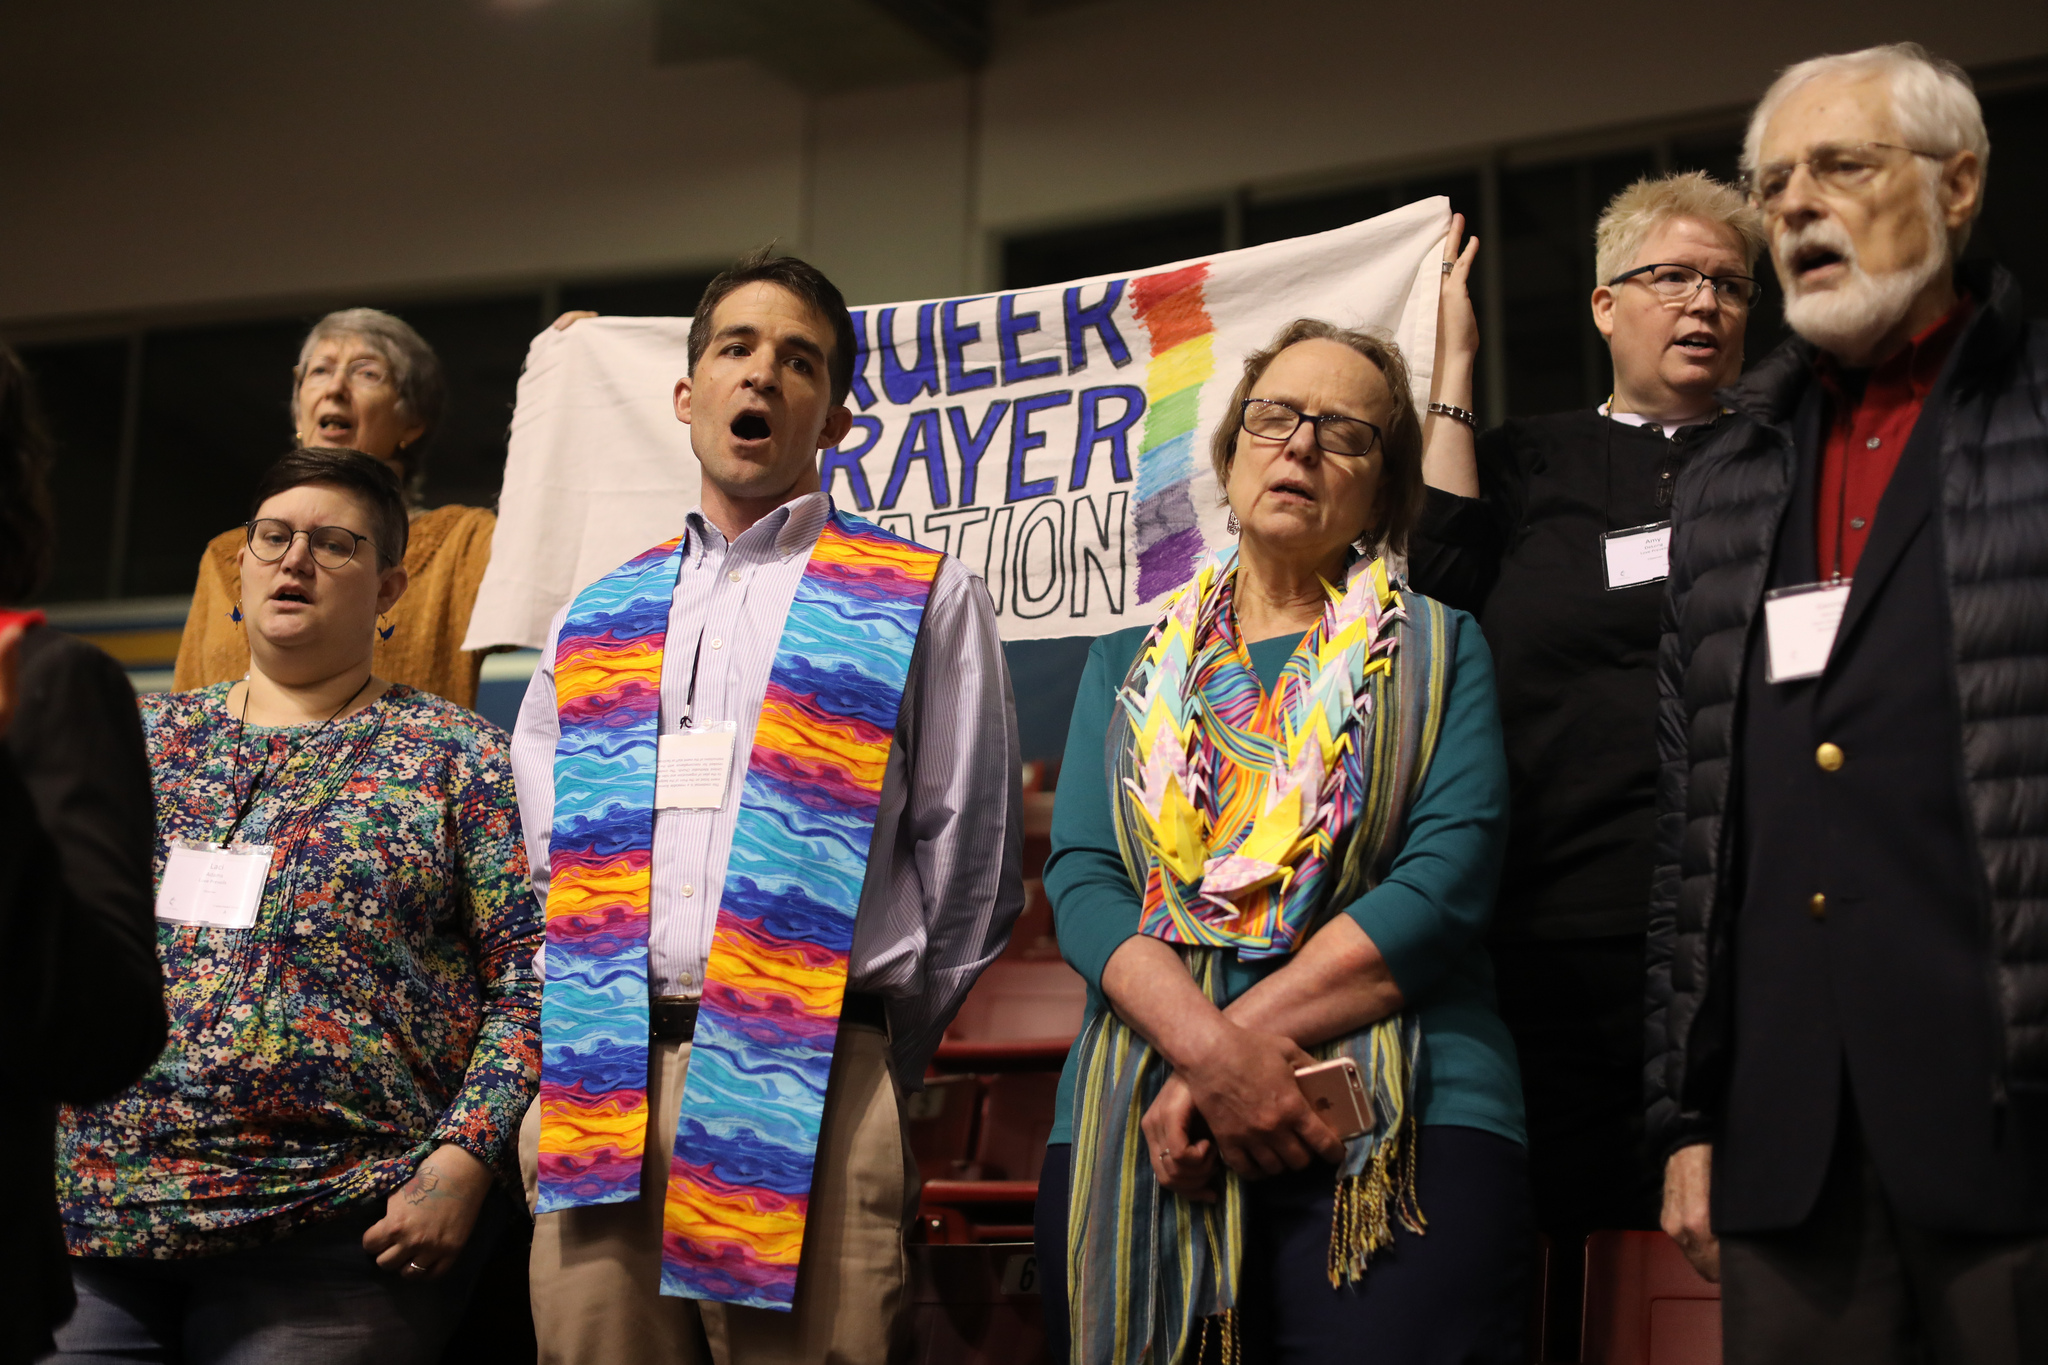 The Rev. Will Green (center) leads the singing of "Jesus Remember Me When You Come Into Your Kingdom" at the "Queer Prayer Station" during the Feb. 23 morning of prayer at the 2019 Special Session of the United Methodist General Conference in St. Louis. Photo by Kathleen Barry, UMNS.